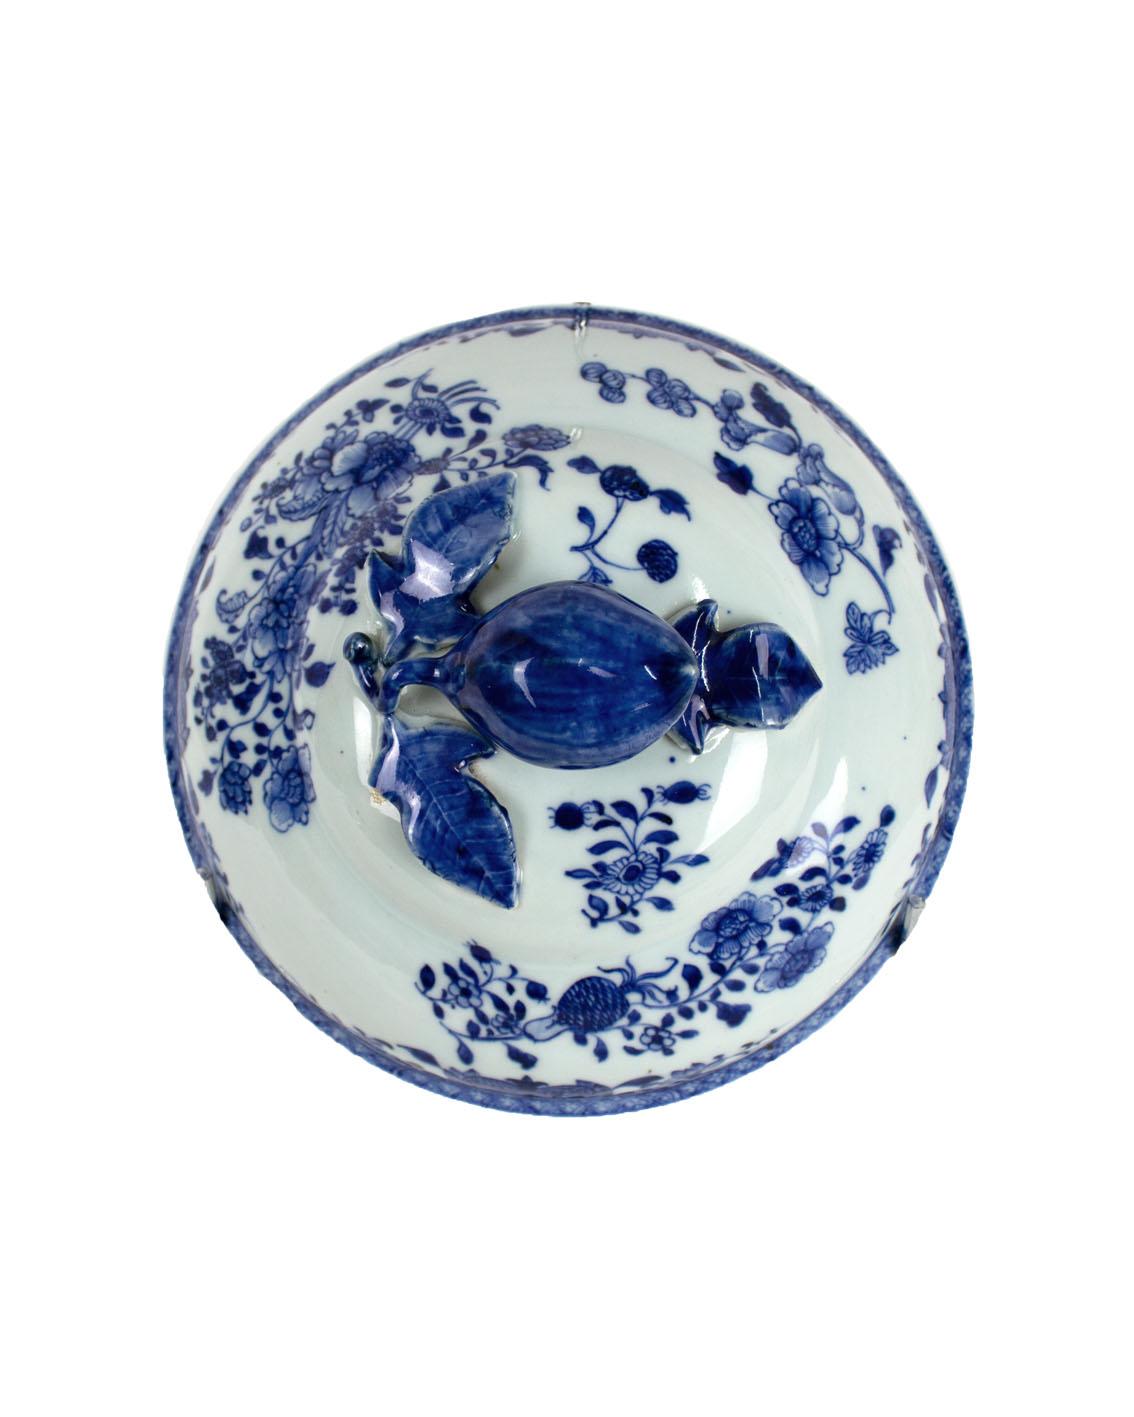 A pair of Chinese Porcelain rounded tureens with cover and platters, East India Company, Qing Dynasty (1644-1912), Qianlong Period (1736-1795). The body of the tureens presents underglaze blue decoration representing floral motifs and geometric